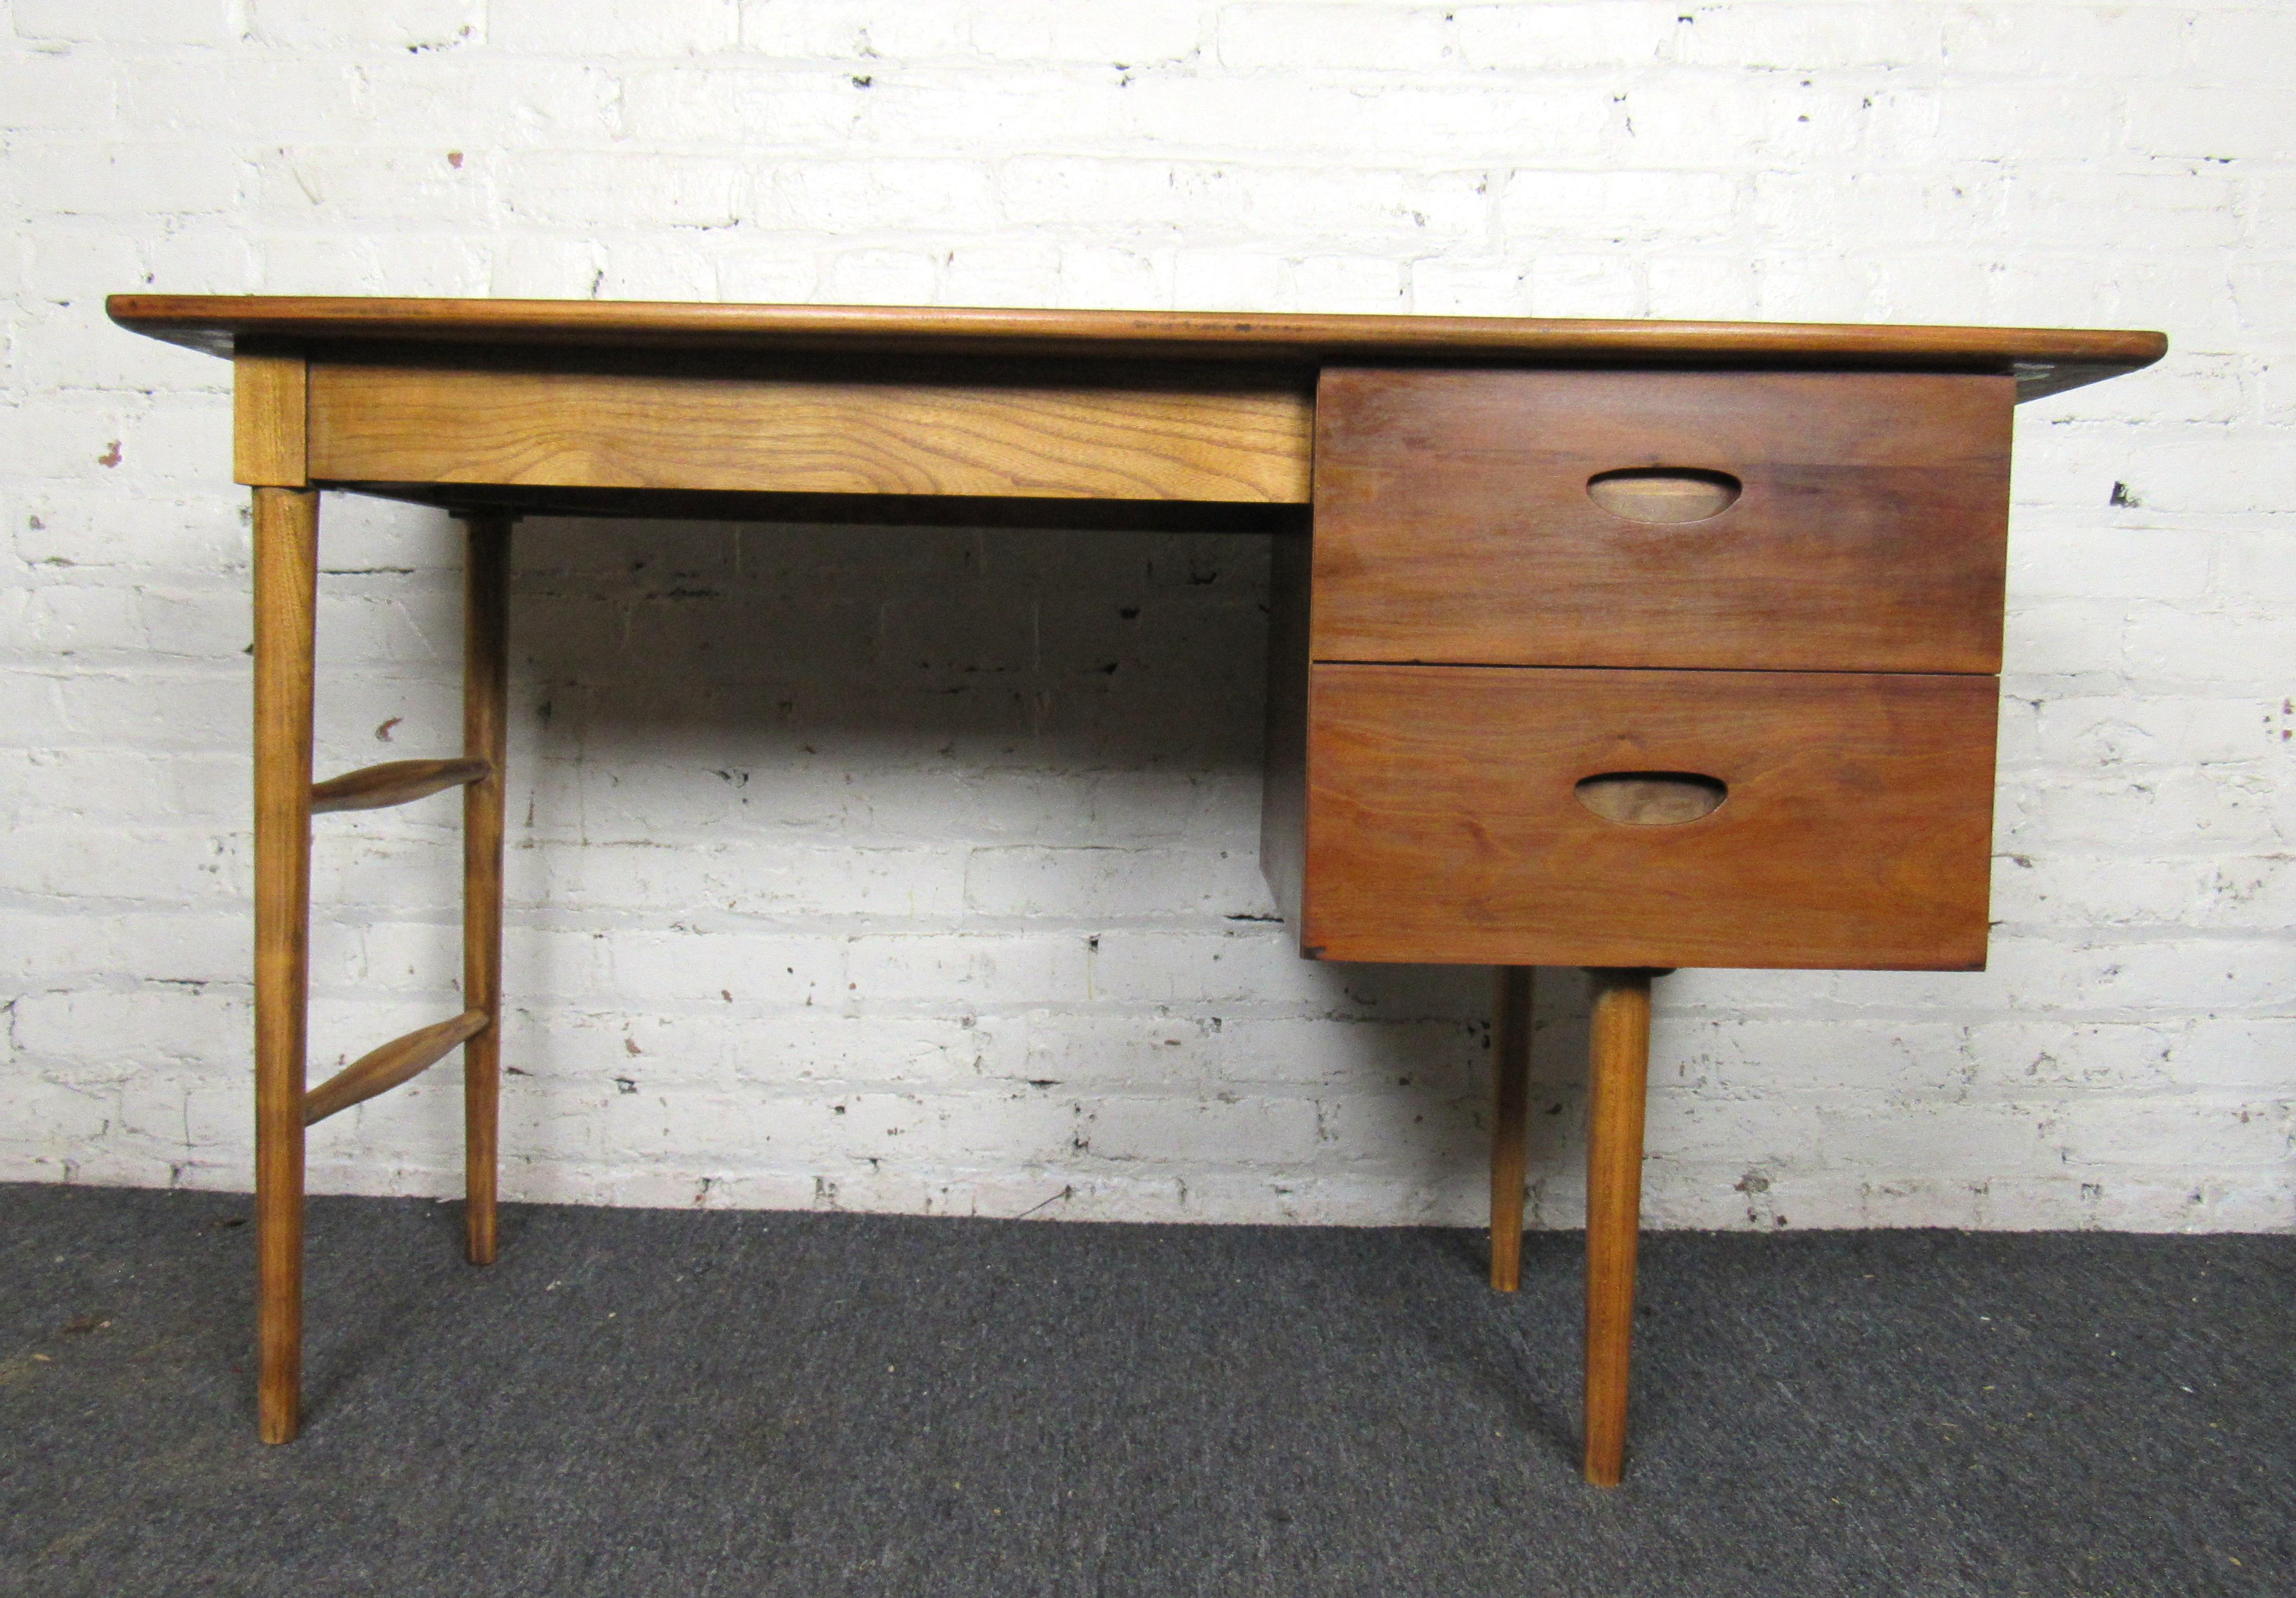 Vintage modern writing desk featured in rich walnut grain. This desk sits on sleek tapered legs and has two spacious drawers.

Please confirm the item location (NY or NJ).